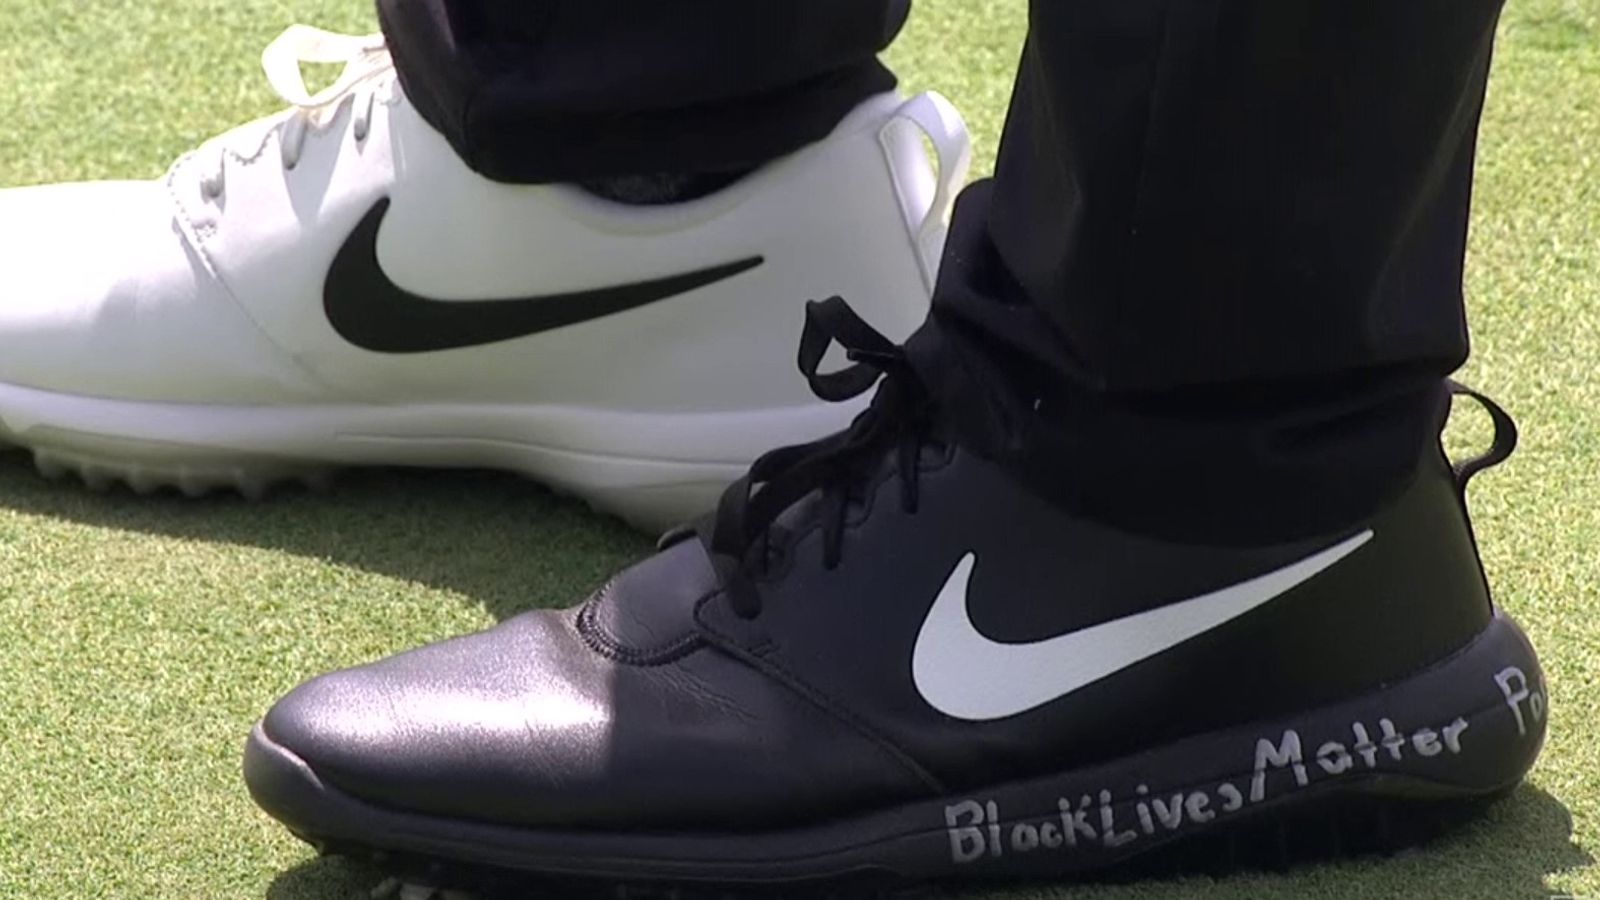 Champ wears black and white shoes to kick off Black 